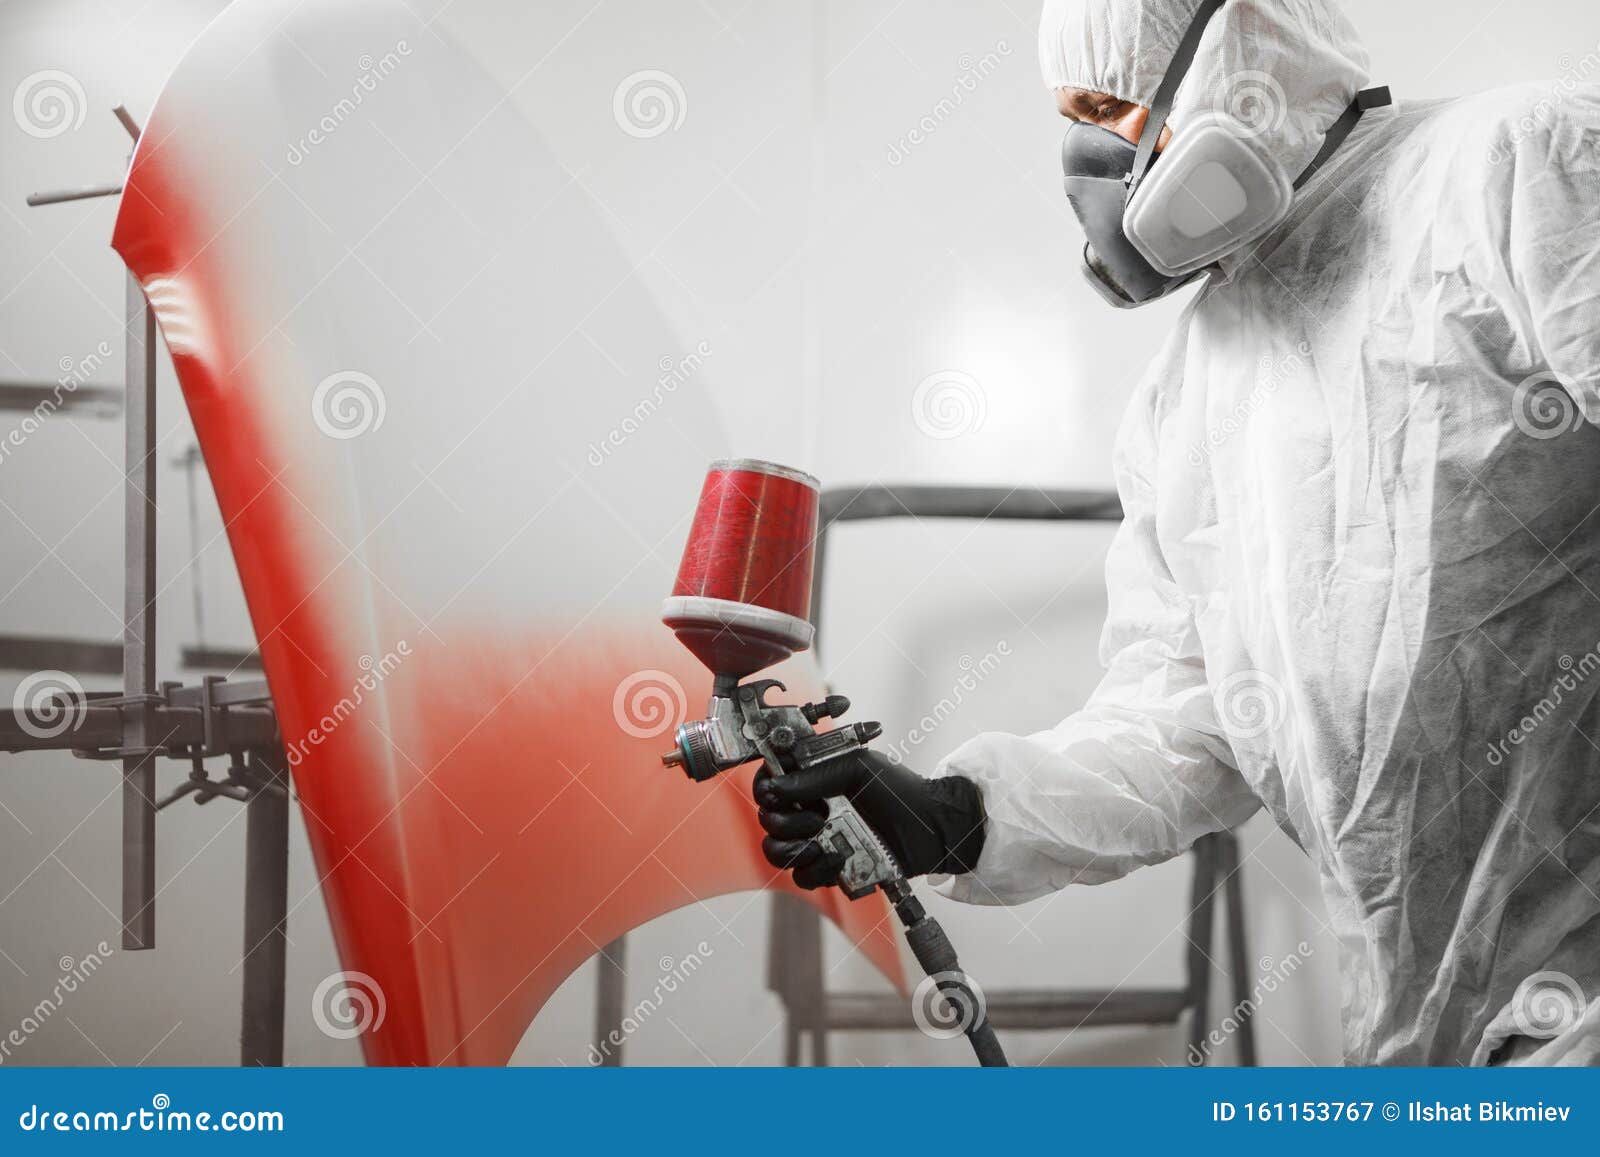 Worker Using Red Paint Spray Gun For Painting A Car Stock Photo - Download  Image Now - iStock